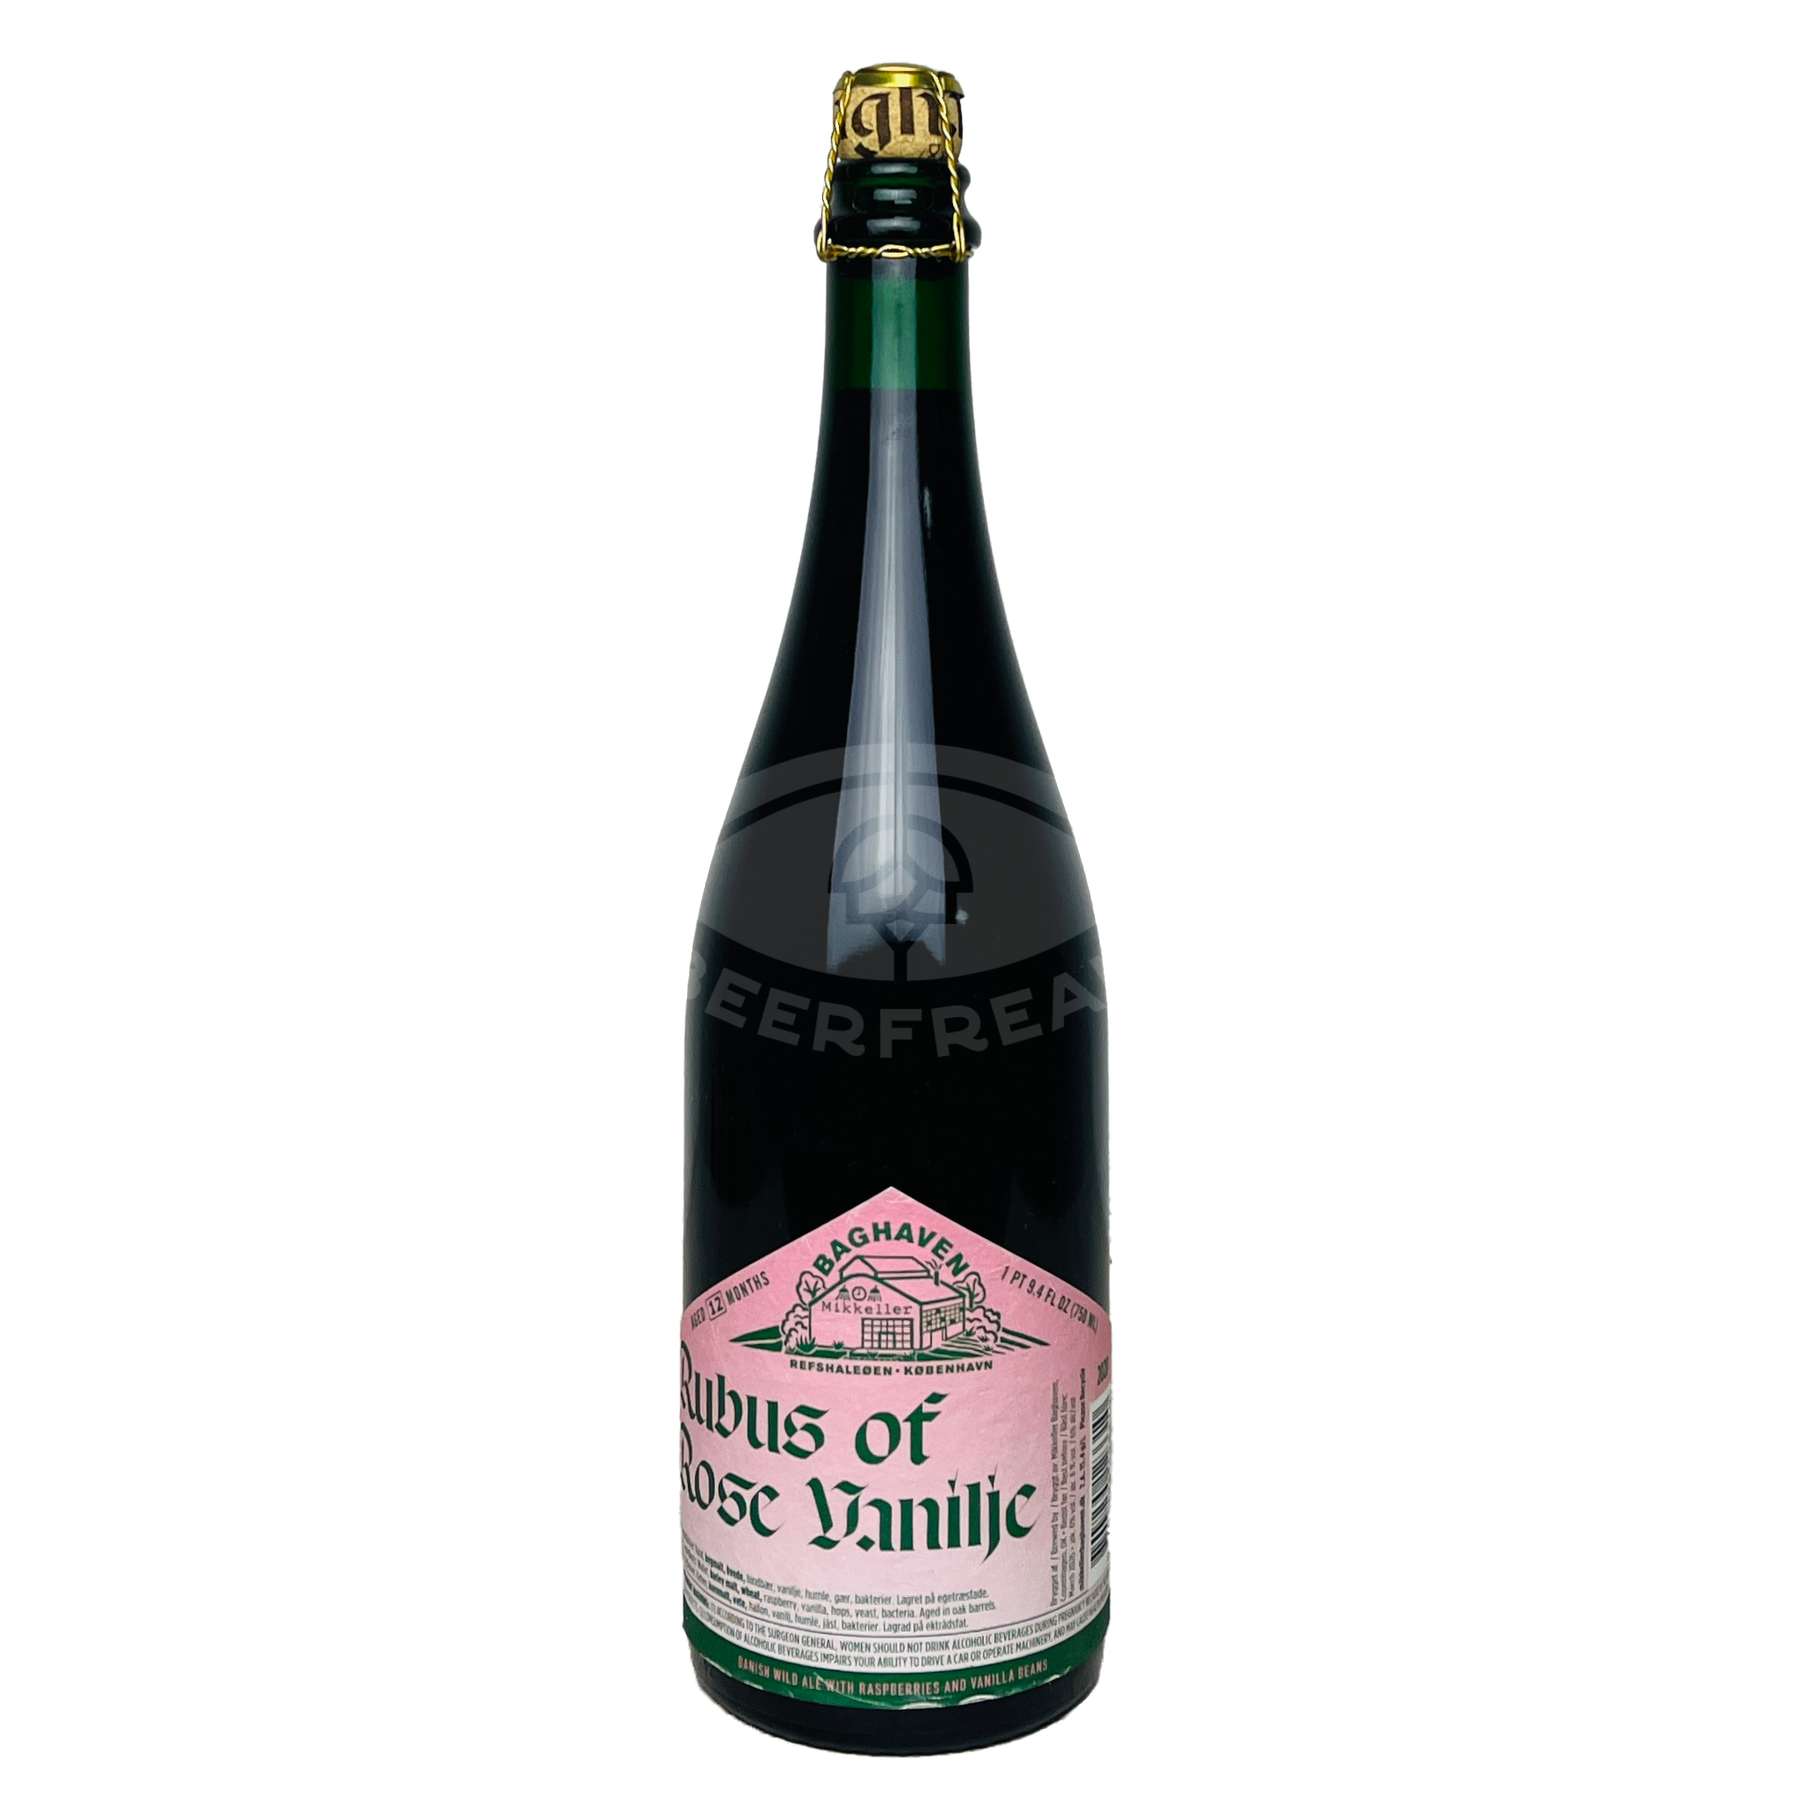 Buy Baghaven Brewing and Blending Rubus of Rose Vanilje 2020 from ...